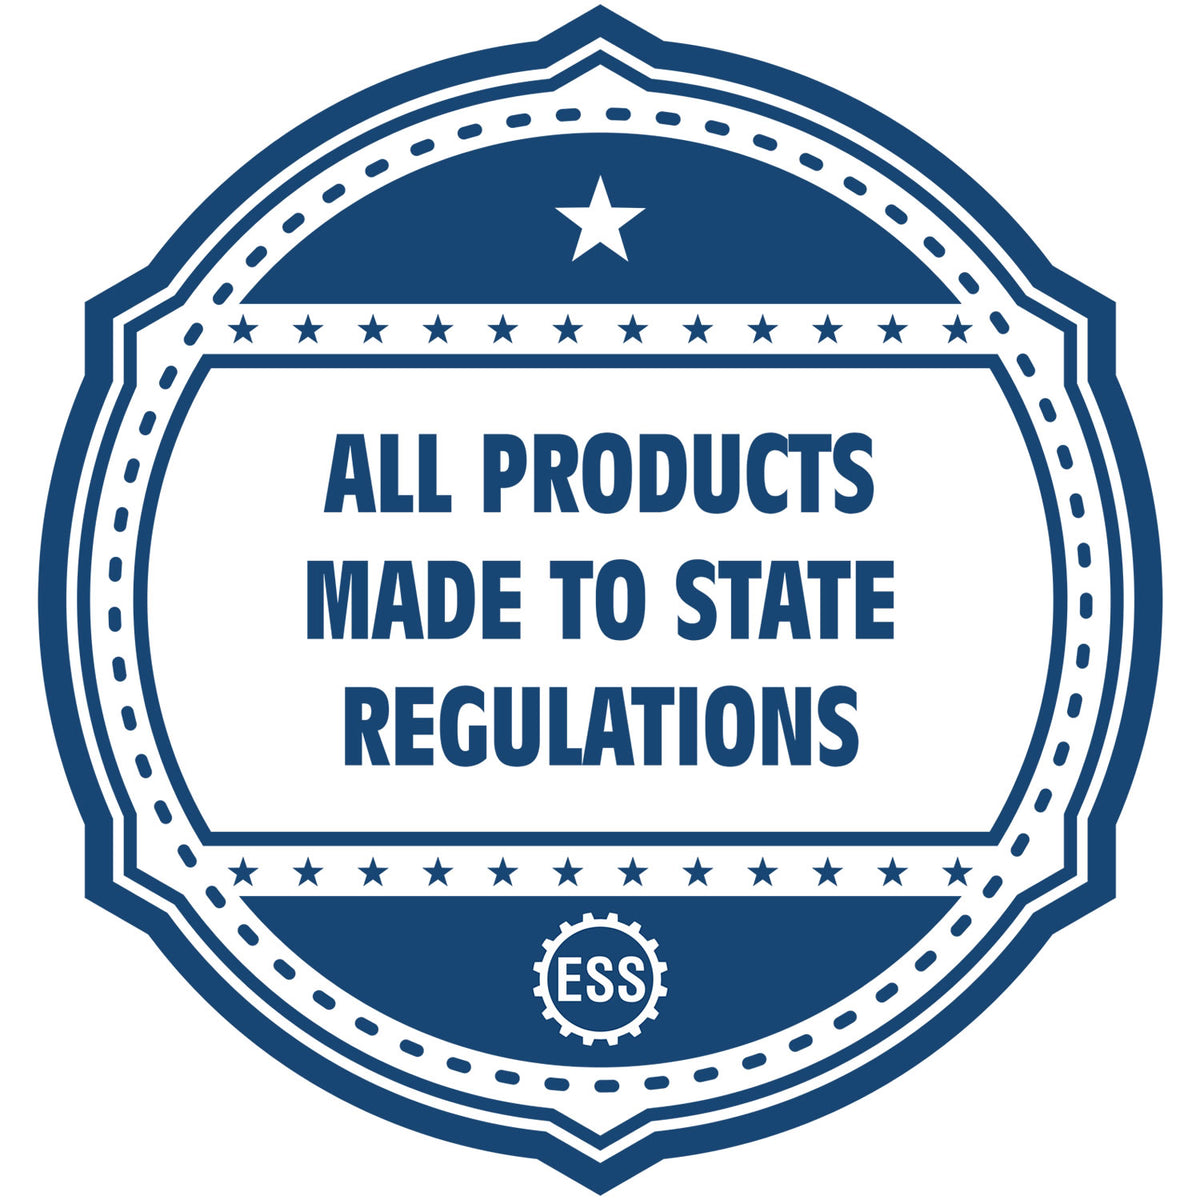 A blue icon or badge for the Hybrid Nevada Landscape Architect Seal showing that this product is made in compliance with state regulations.